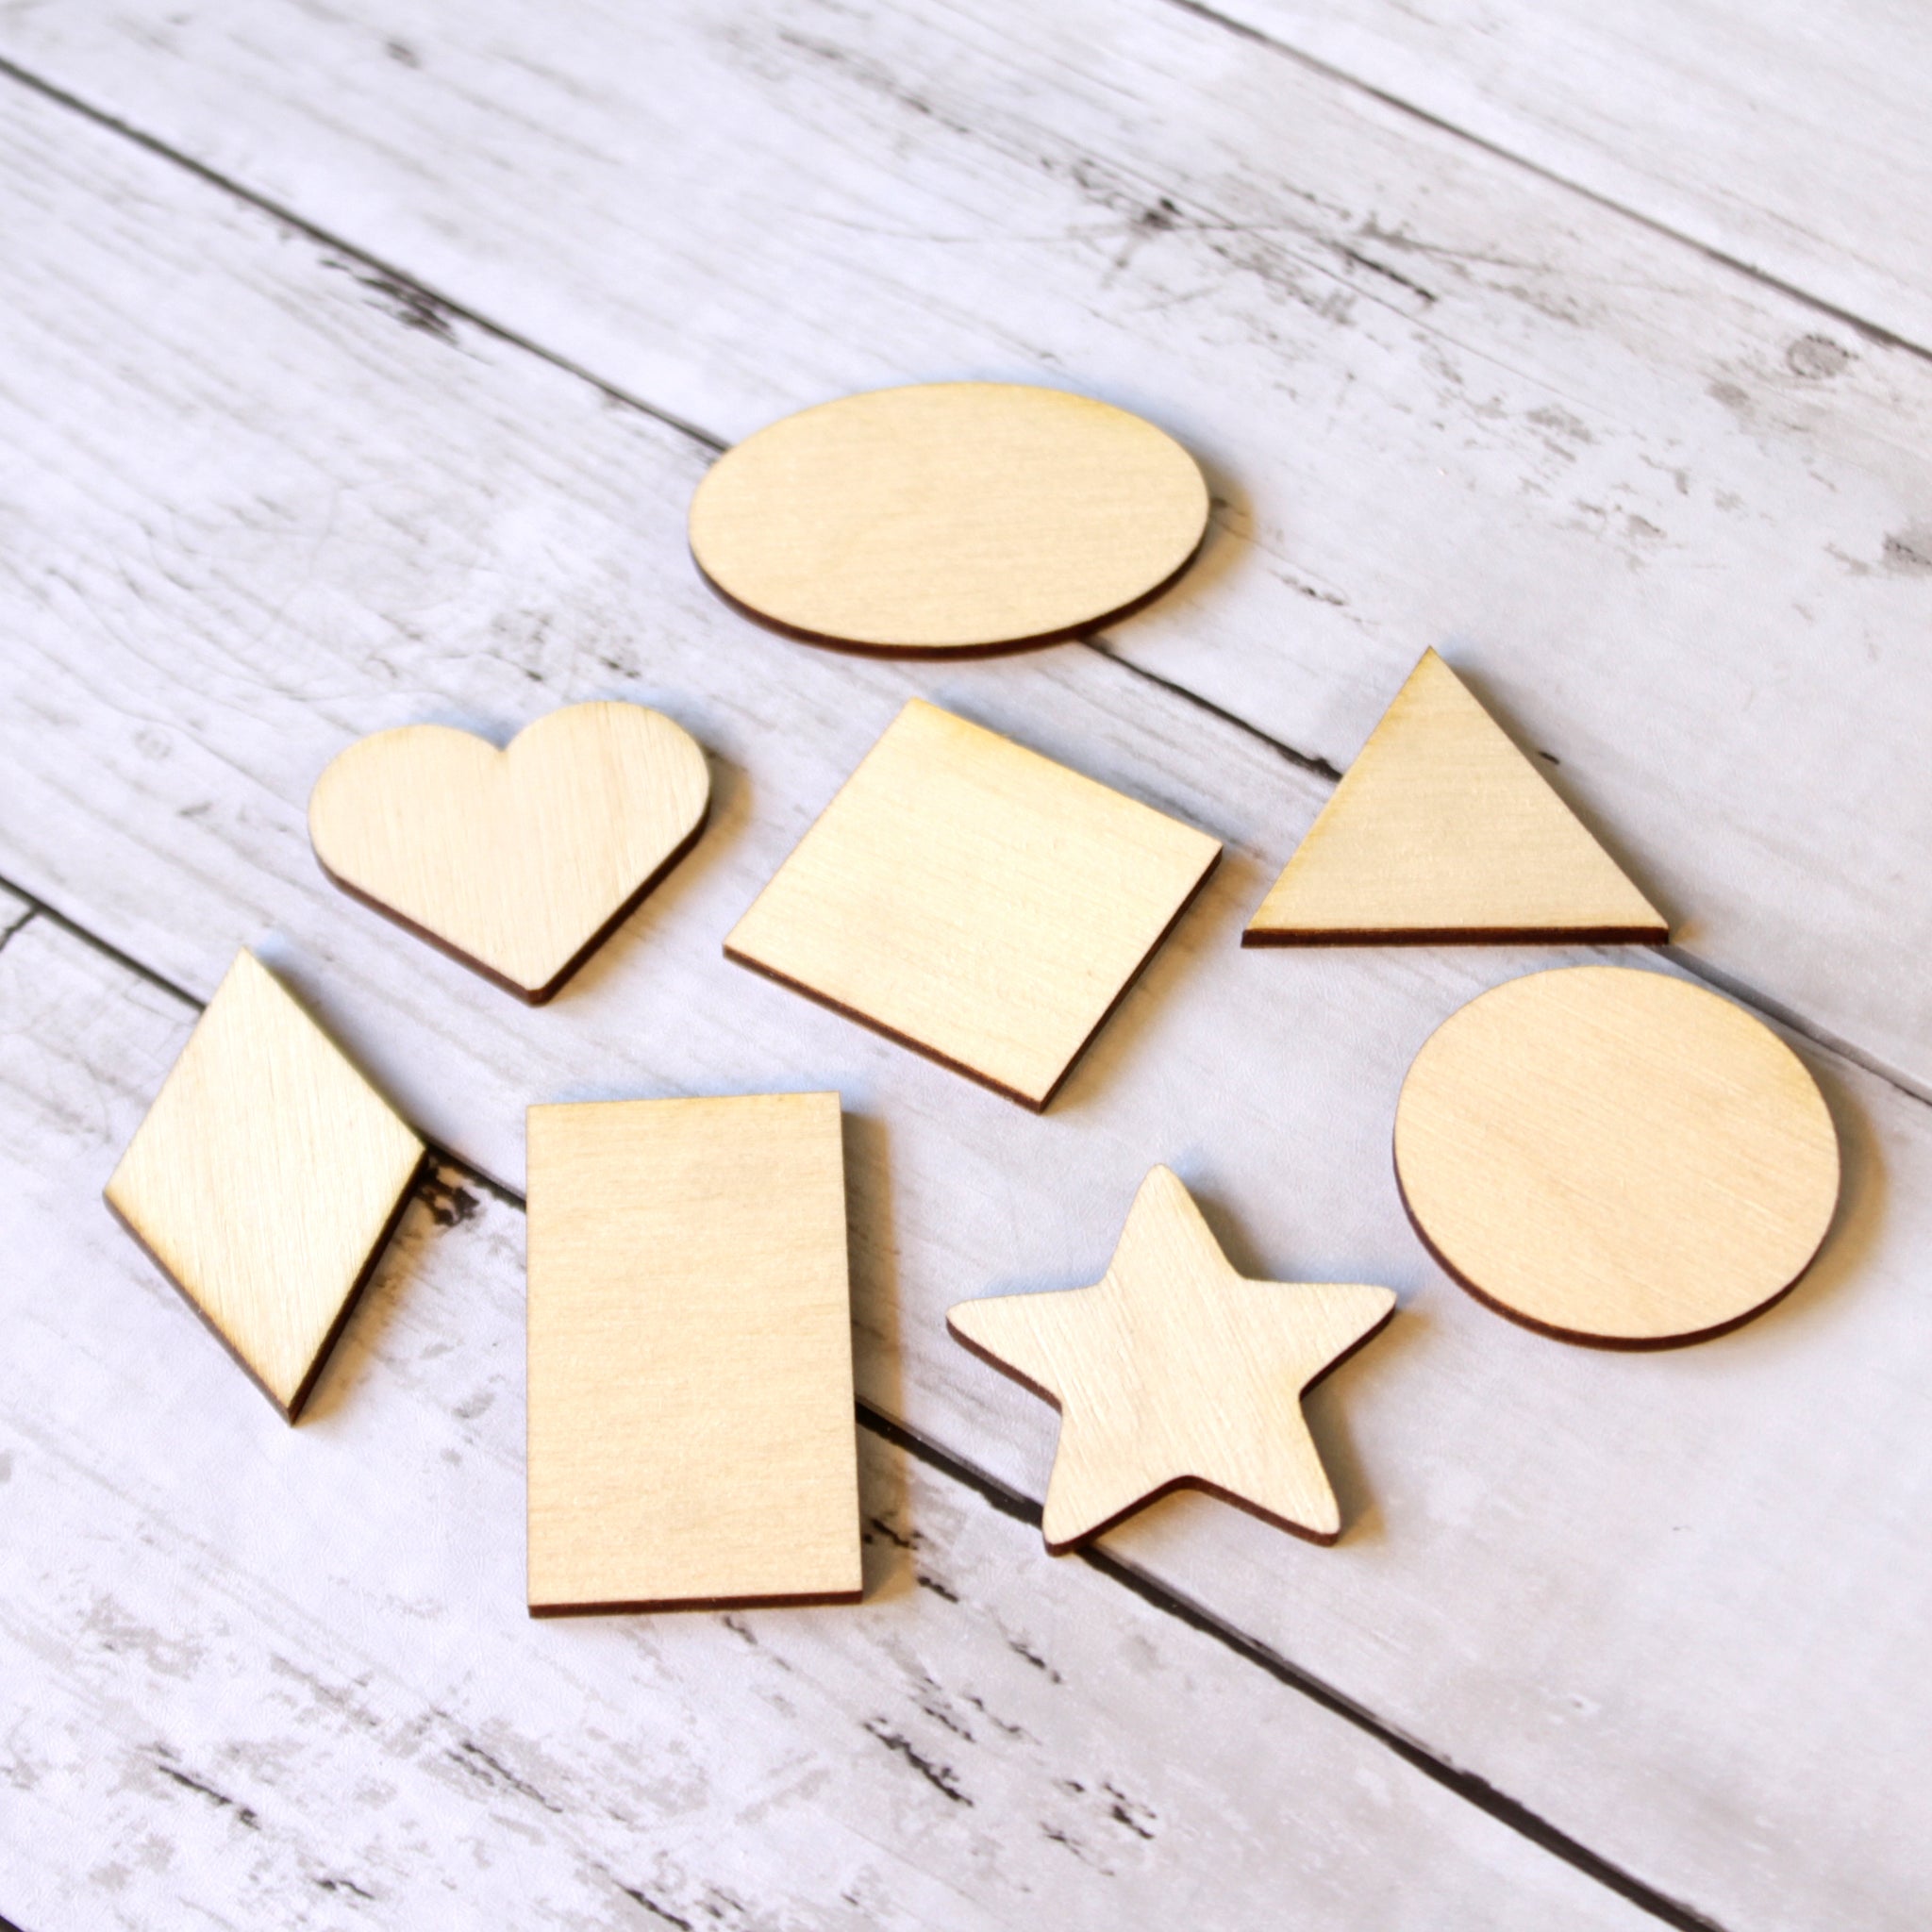 Basic Geometric Shapes, Wooden Set of 7 – Epicycle Designs